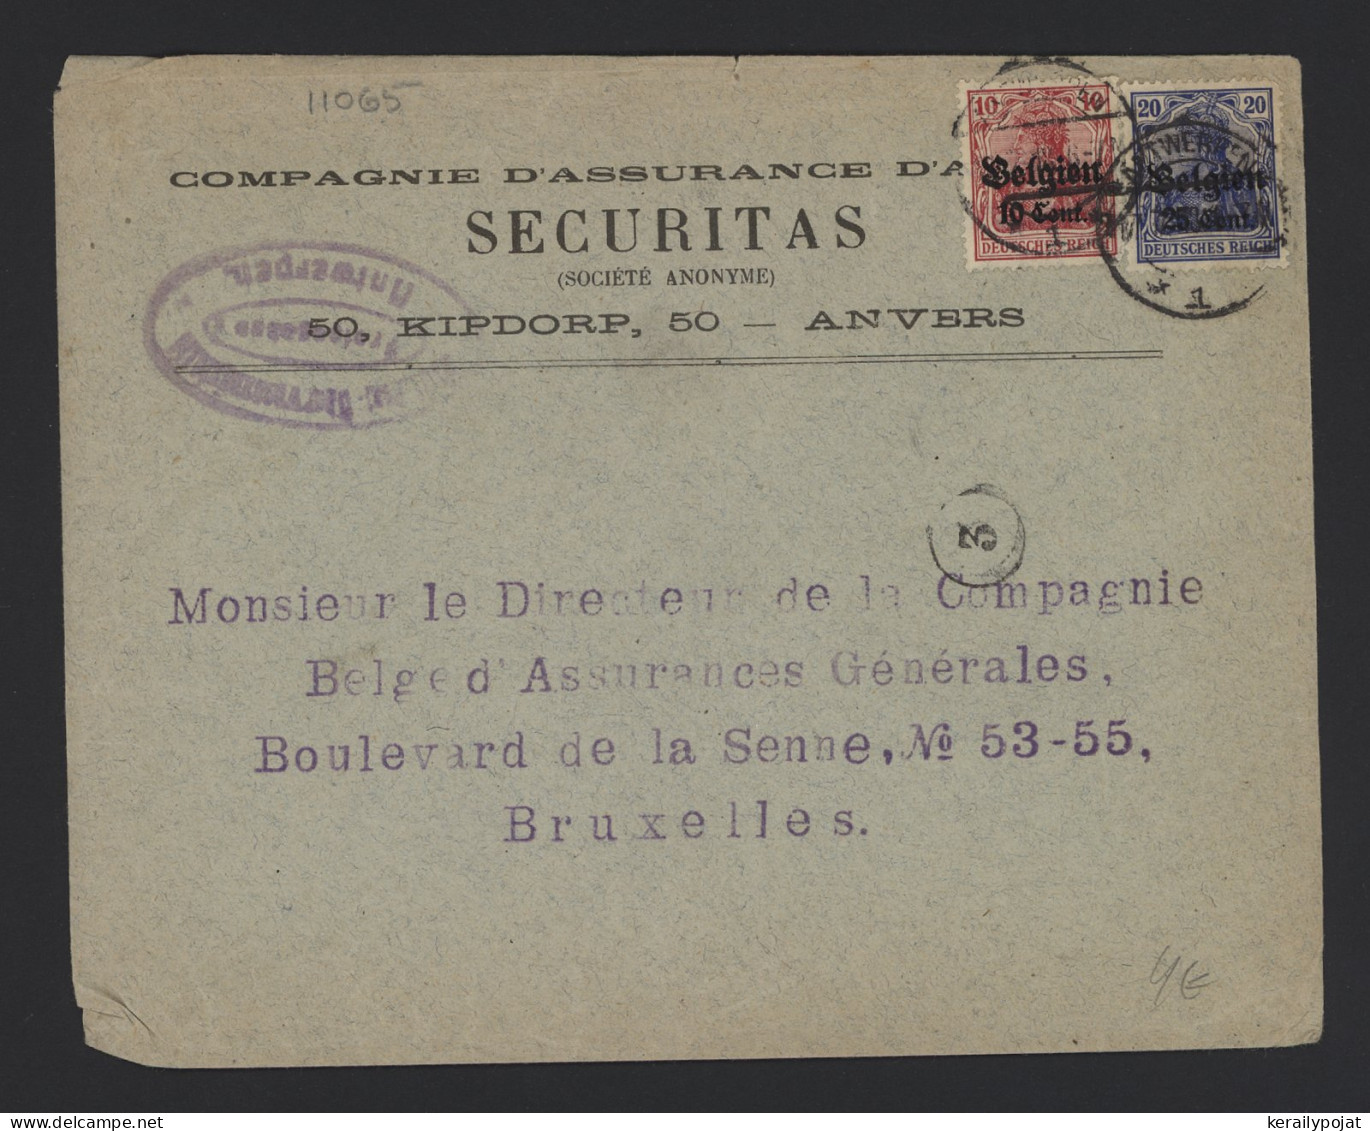 Germany Belgium 1910's Business Cover To Bruxelles__(11065) - OC38/54 Belgian Occupation In Germany